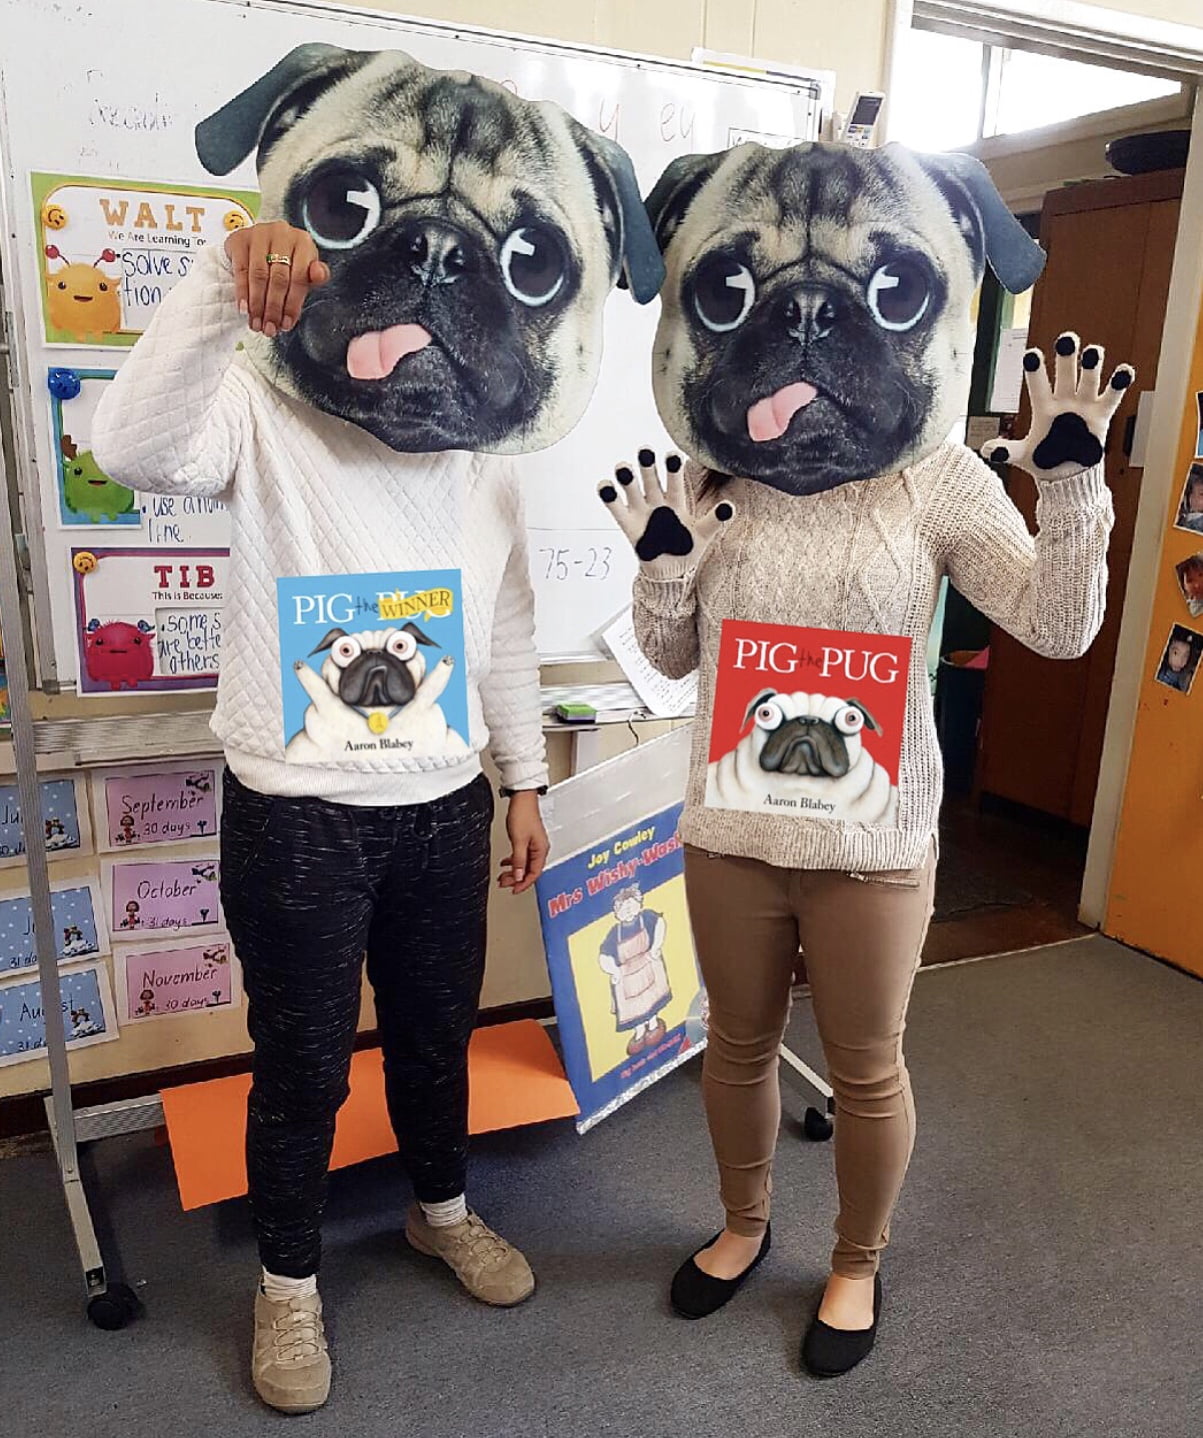 @learnlovegrow dressed up as Pig the Pug